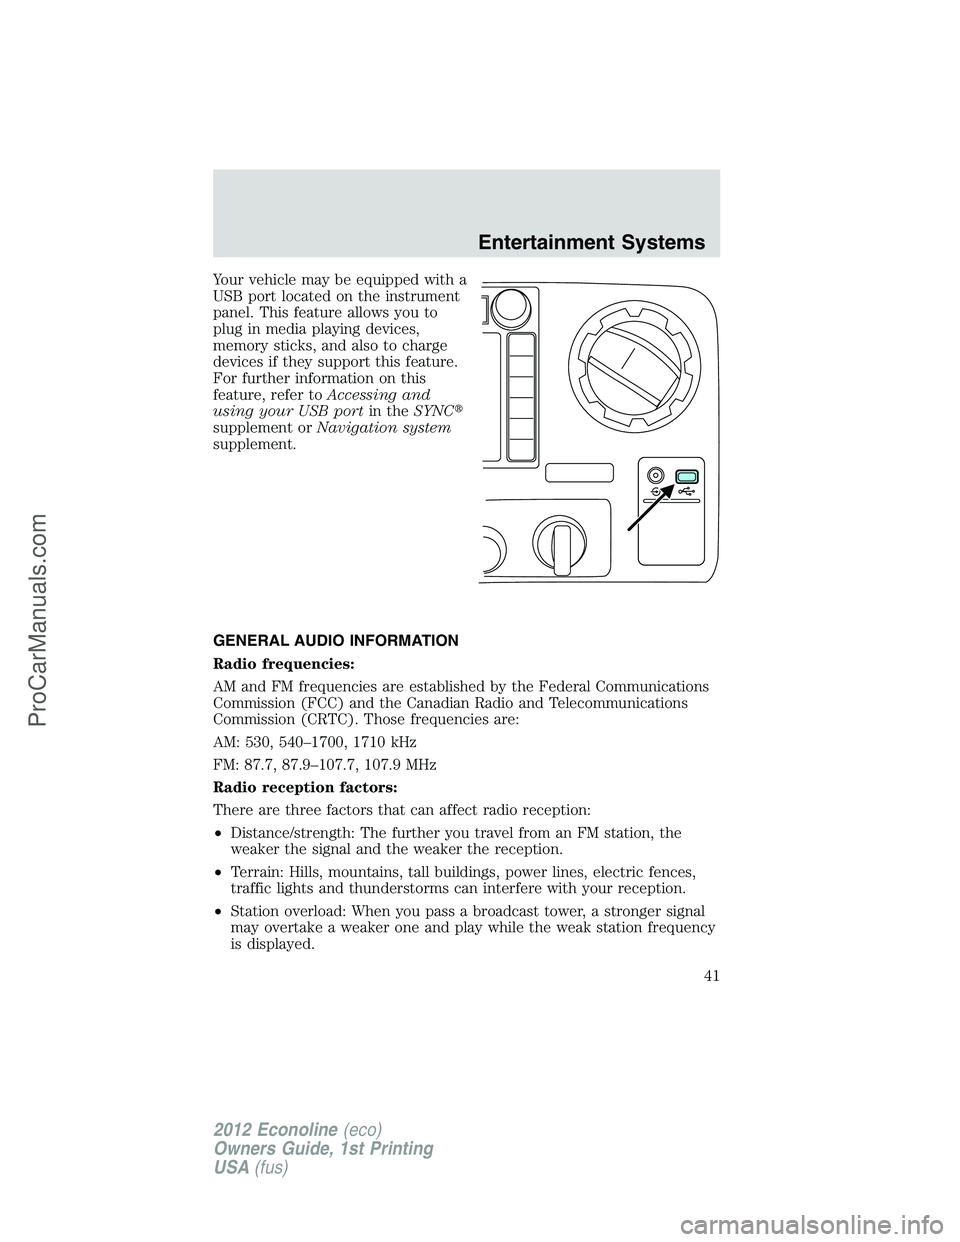 FORD E-350 2012 Service Manual Your vehicle may be equipped with a
USB port located on the instrument
panel. This feature allows you to
plug in media playing devices,
memory sticks, and also to charge
devices if they support this f